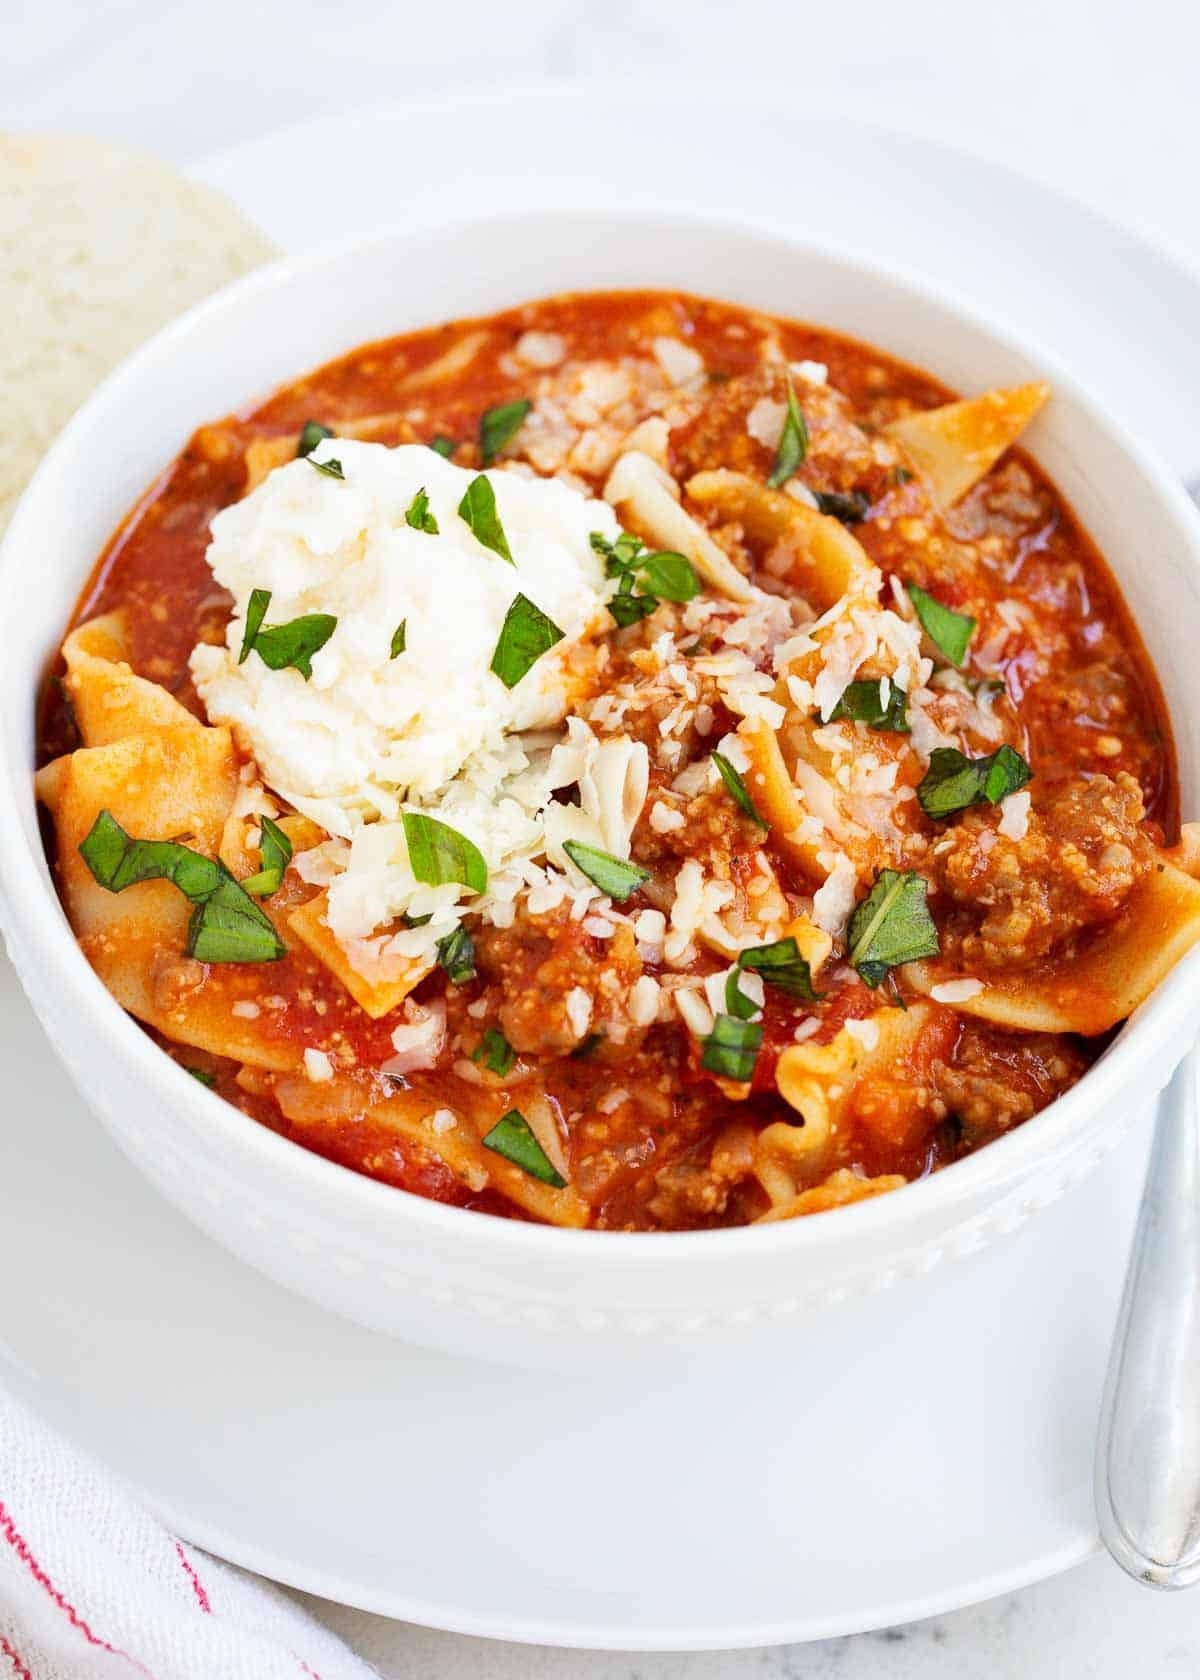 Bowl of lasagna soup with Italian sausage, bite-sized lasagna noodles, and lots of cheese in a tomato-based broth.